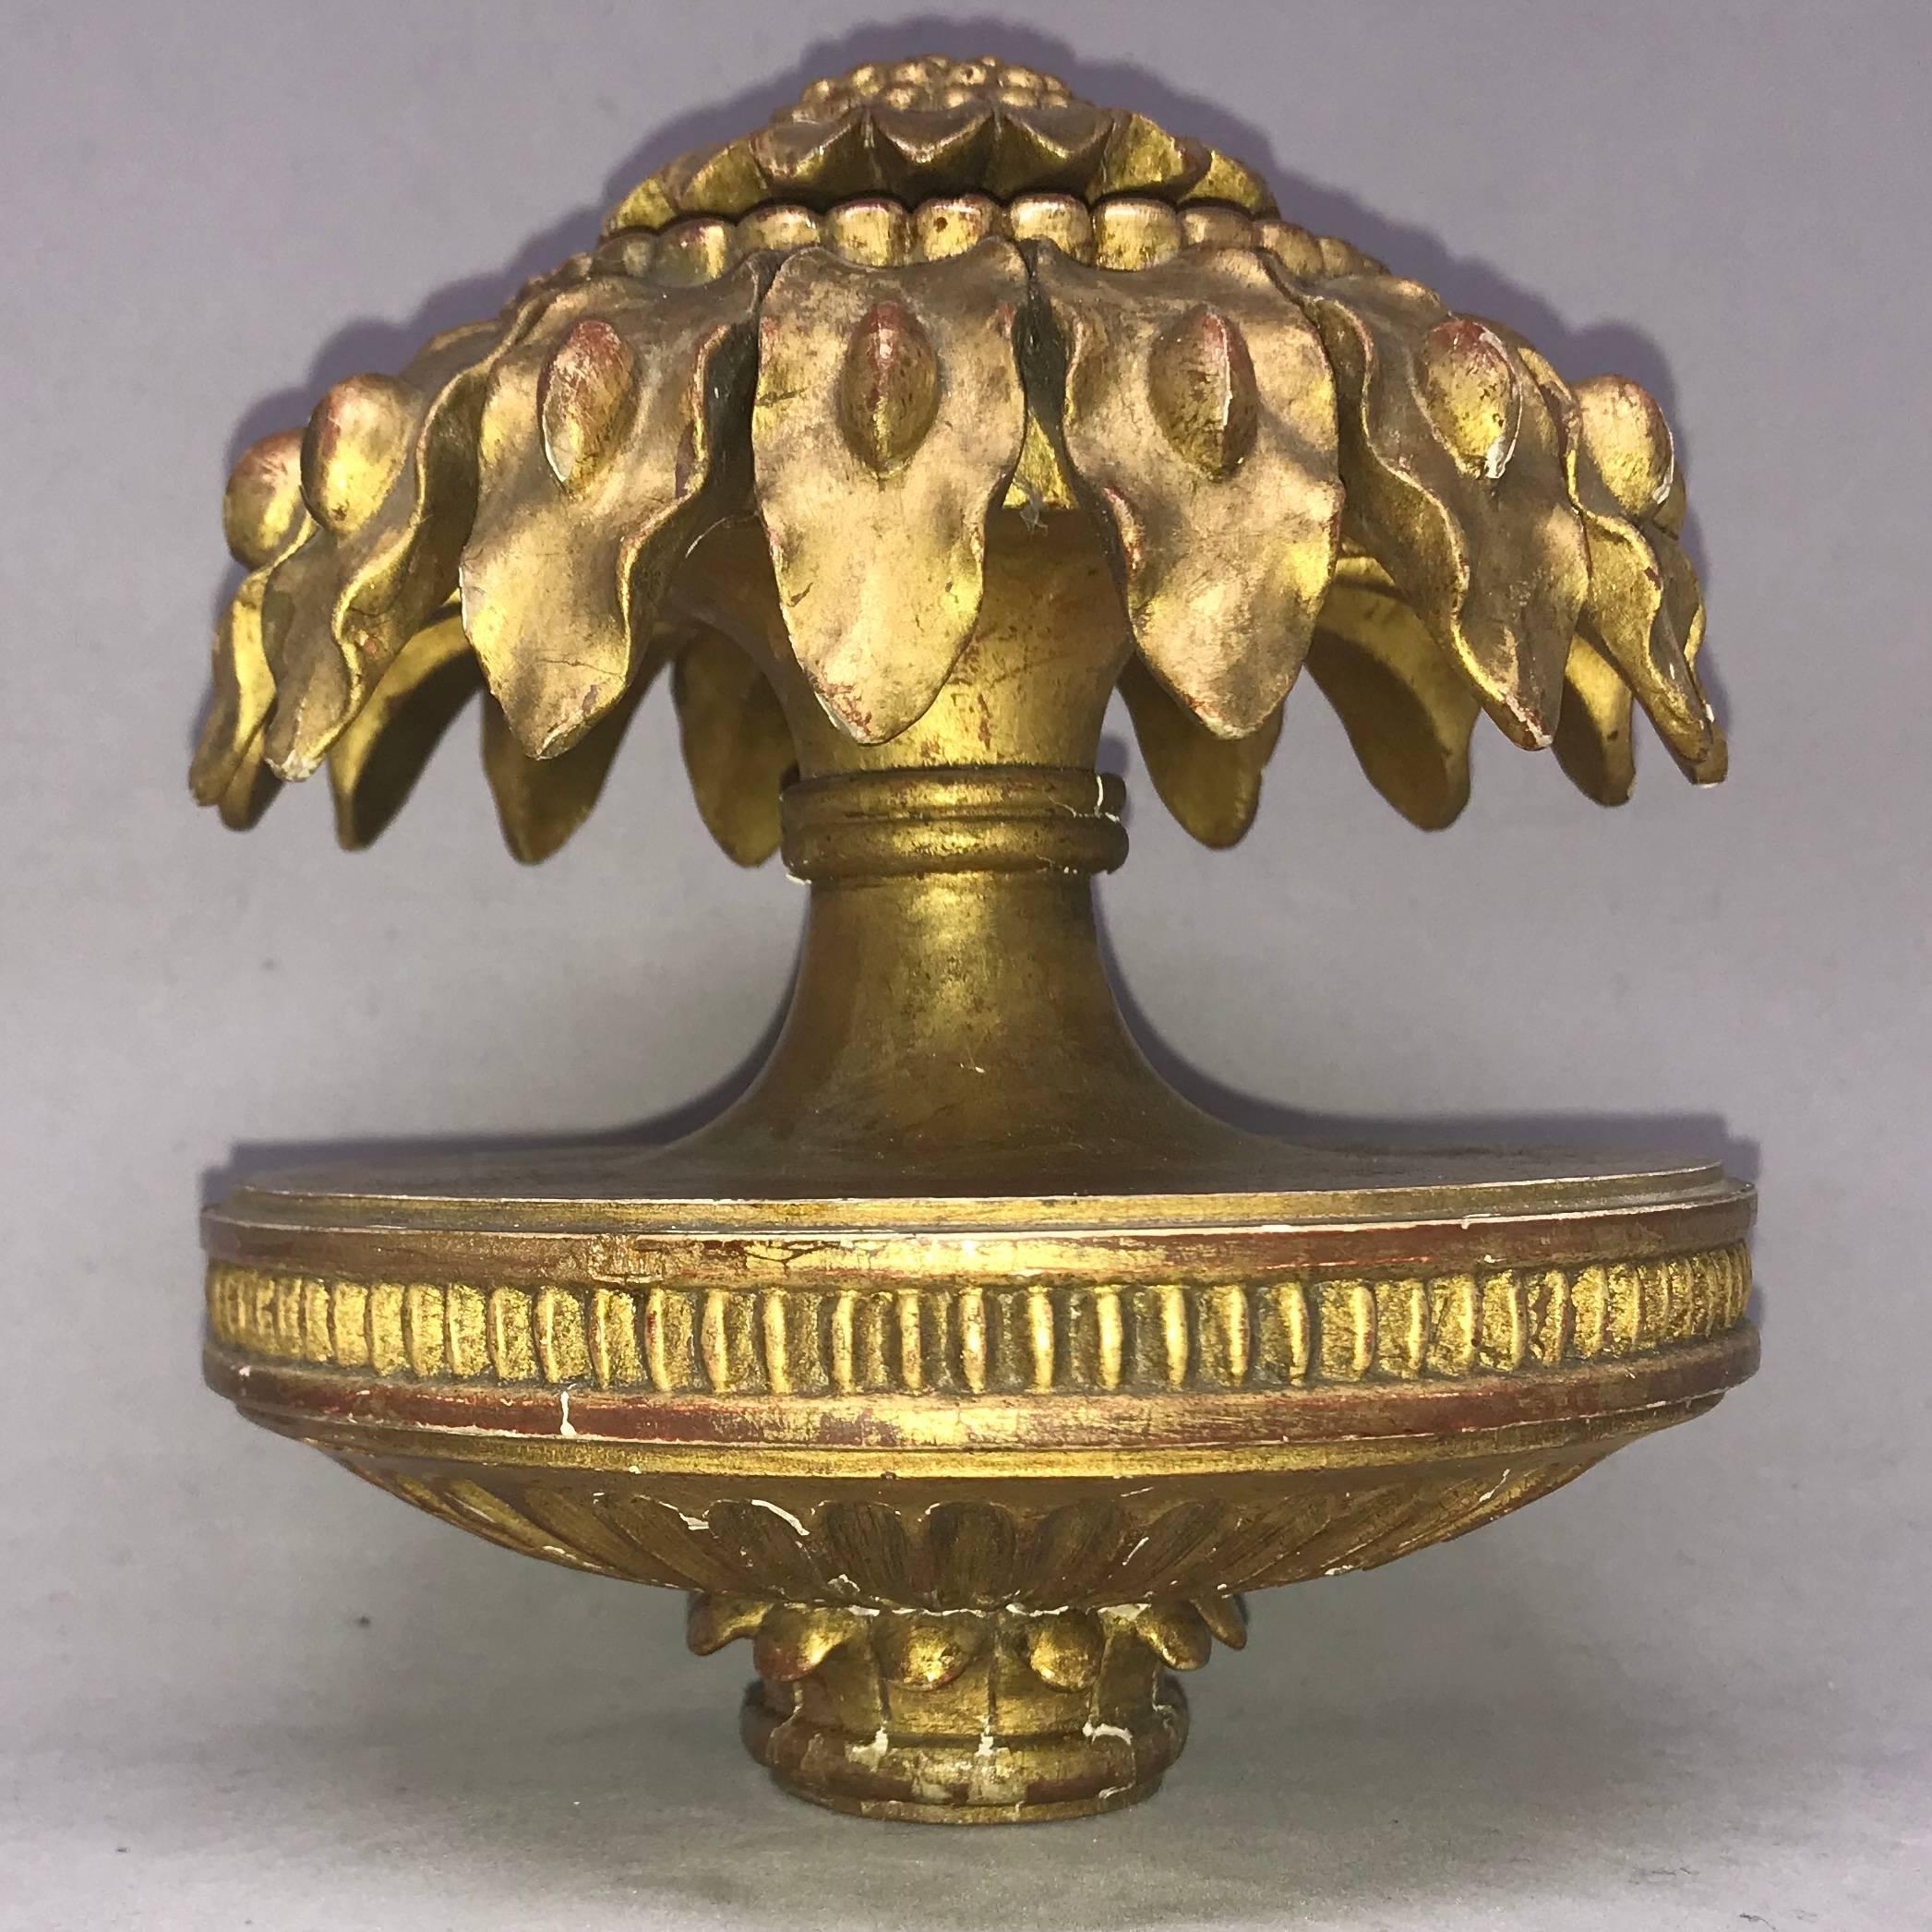 Carved gilt-wood sunflower finial ornament. Gilt carved and gesso sunflower decoration issuing from round neoclassical base. Europe, early 20th century.
Dimensions: 5.25